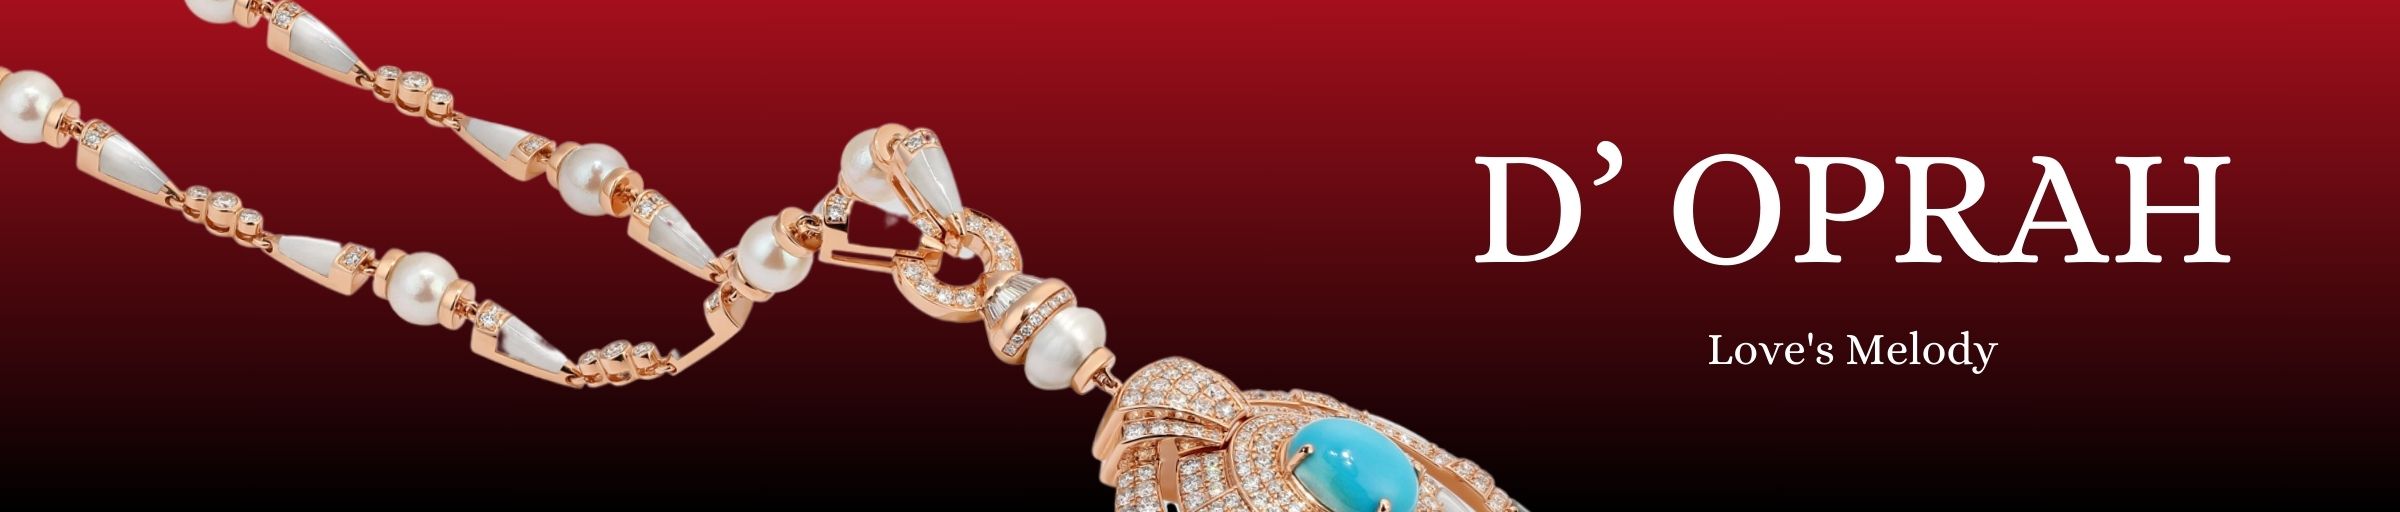 The handcrafted pieces in the D' Opera collection reflect luxury and elegance, with meticulous attention to detail and the use of the finest materials and rare gemstones. 